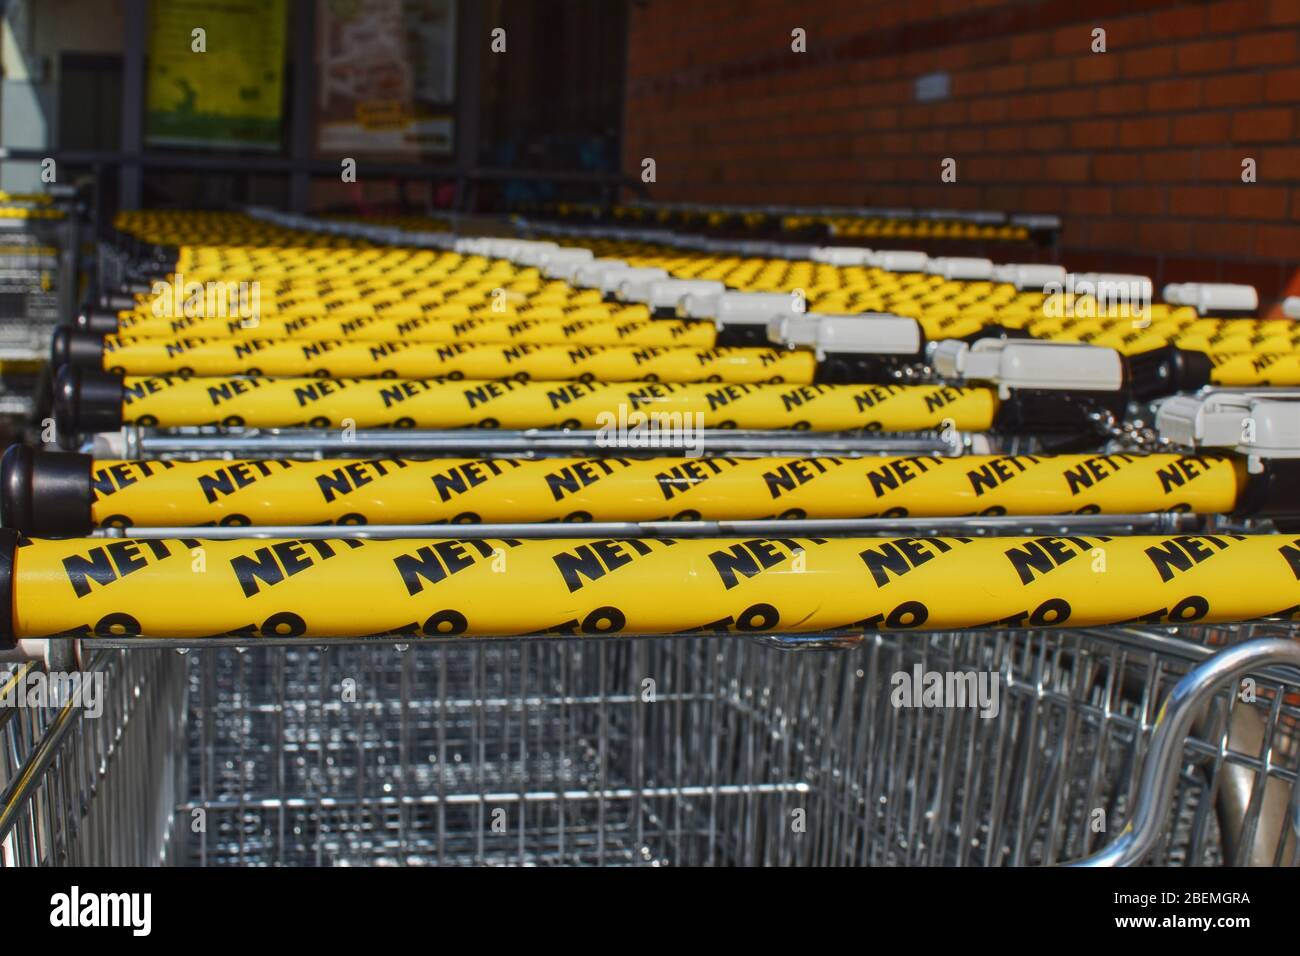 Berlin, Germany - April 02, 2018: A row of shopping trolleys with focus on the handles in the foreground. Stock Photo